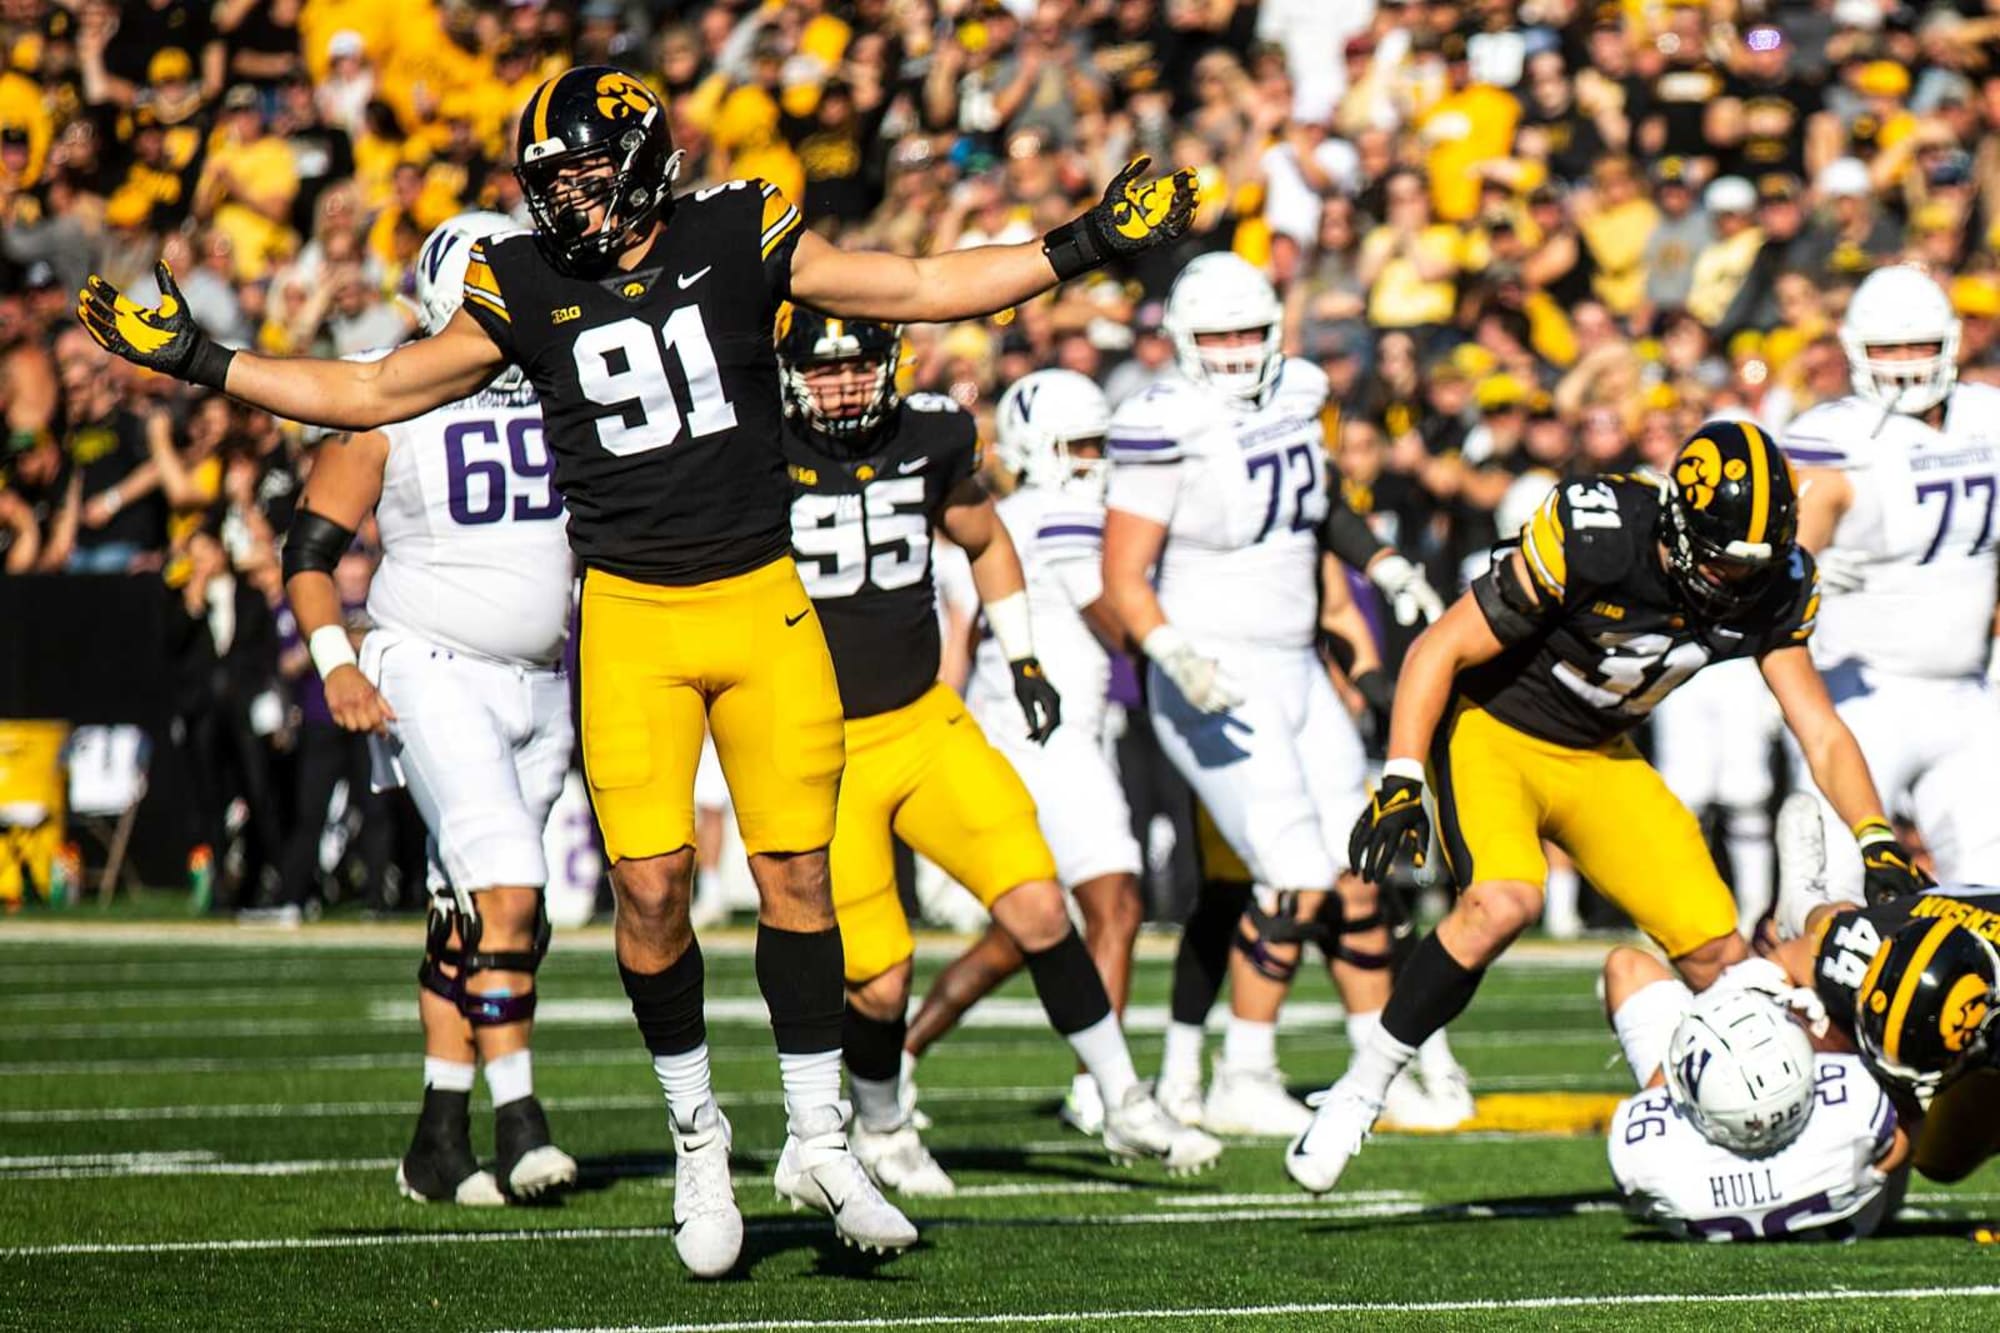 owa defensive lineman Lukas Van Ness (91) celebrates a stop during a NCAA Big Ten Conference football game against Northwestern, Saturday, Oct. 29, 2022, at Kinnick Stadium in Iowa City, Iowa.  © Joseph Cress / USA TODAY NETWORK - Green Bay Packers